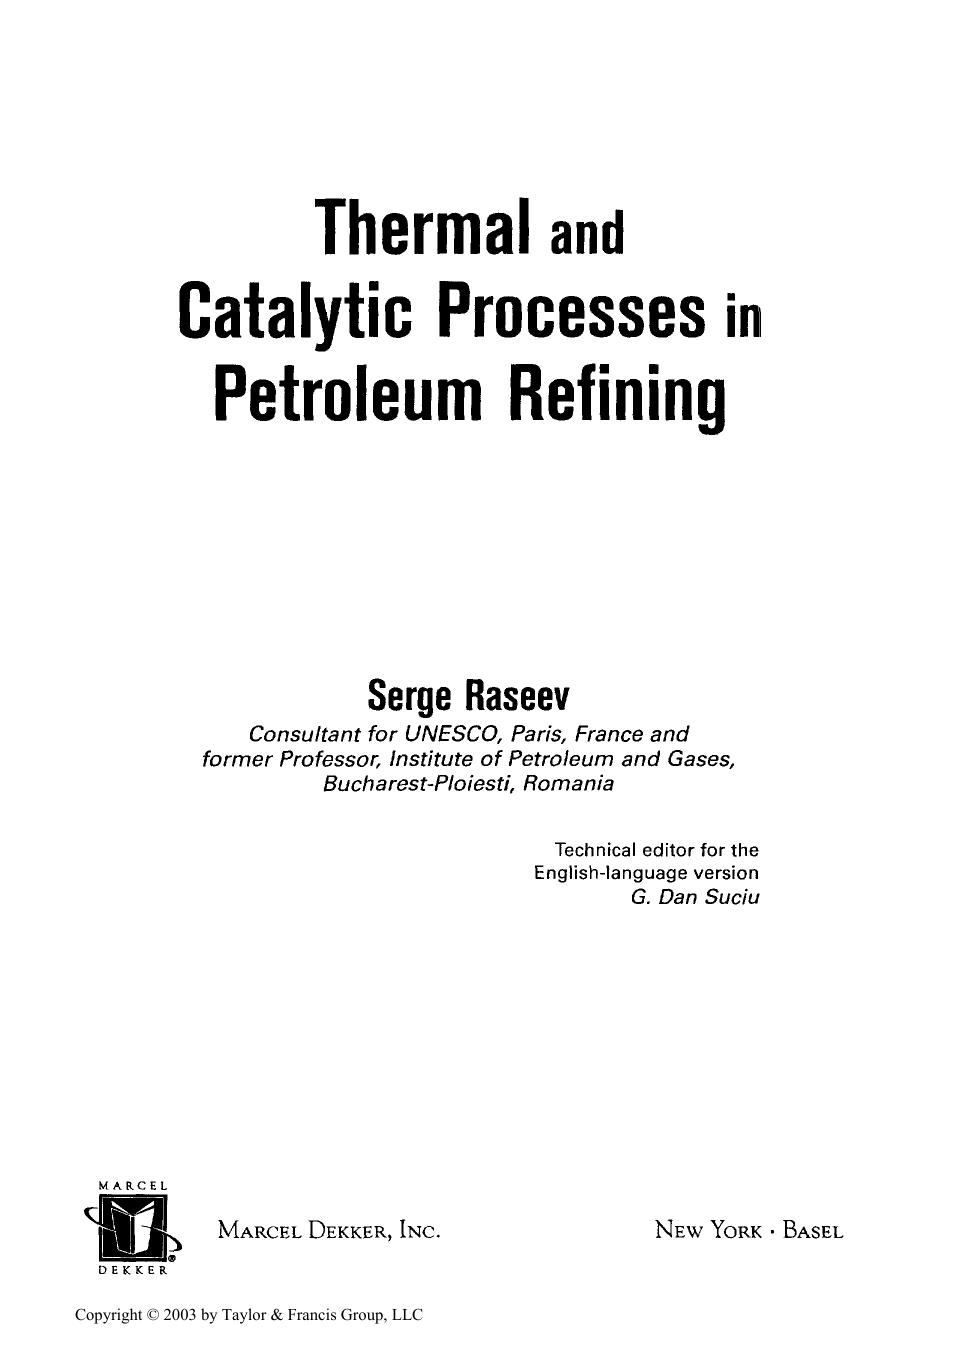 Thermal and Catalytic Processes in Petroleum Refining 2003